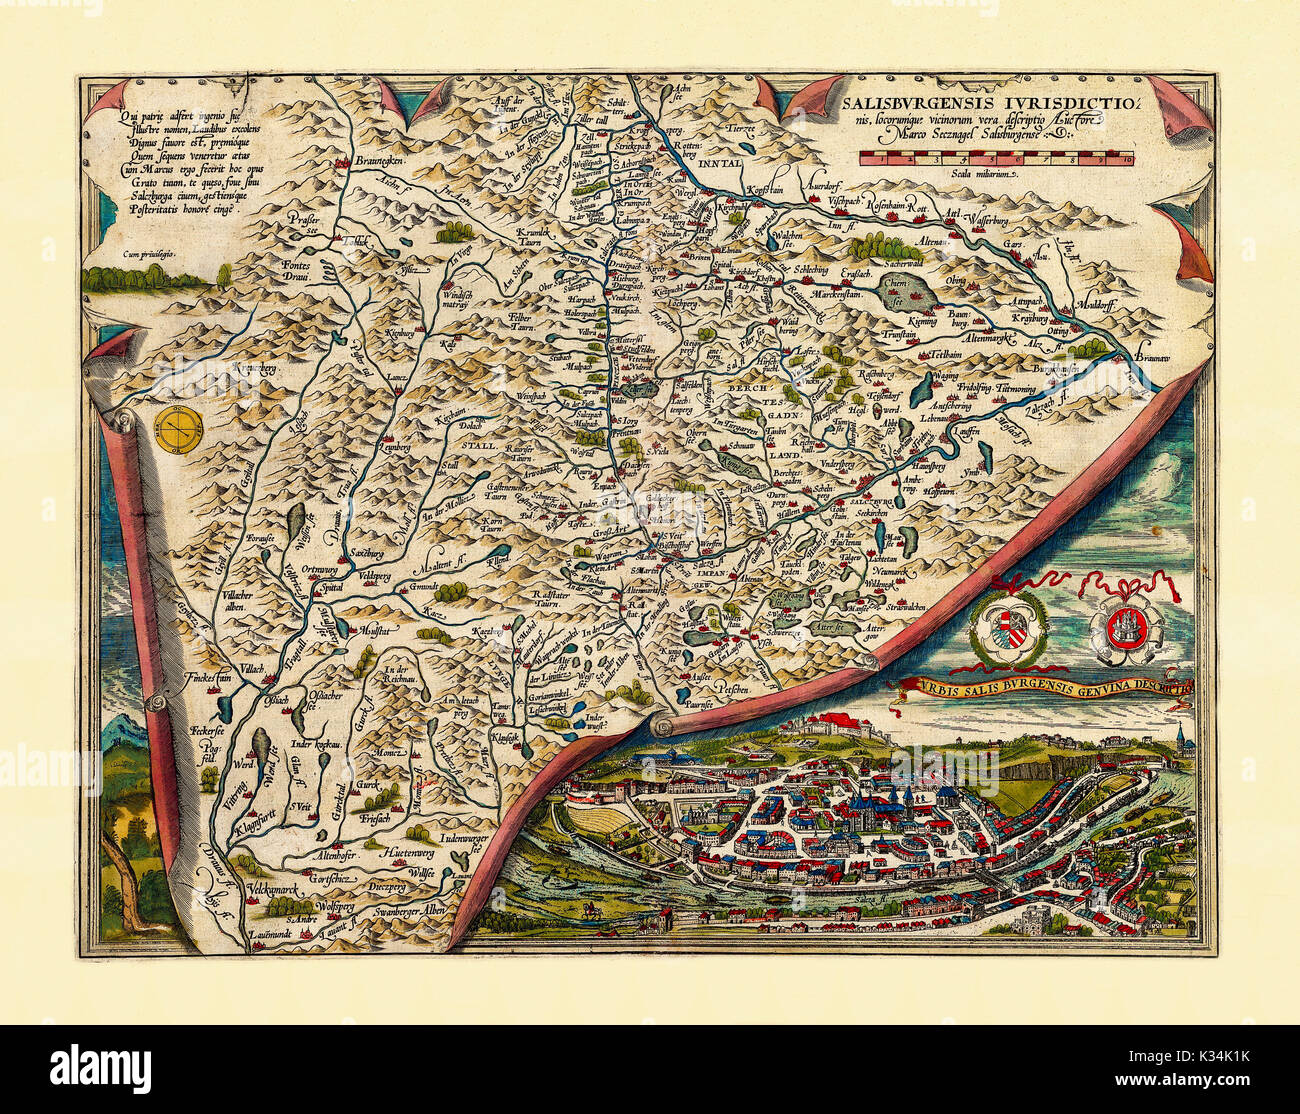 Old map of Salzburg region. Excellent state of preservation realized in ancient style. All the graphic composition is inside a frame. By Ortelius, Theatrum Orbis Terrarum, Antwerp, 1570 Stock Photo